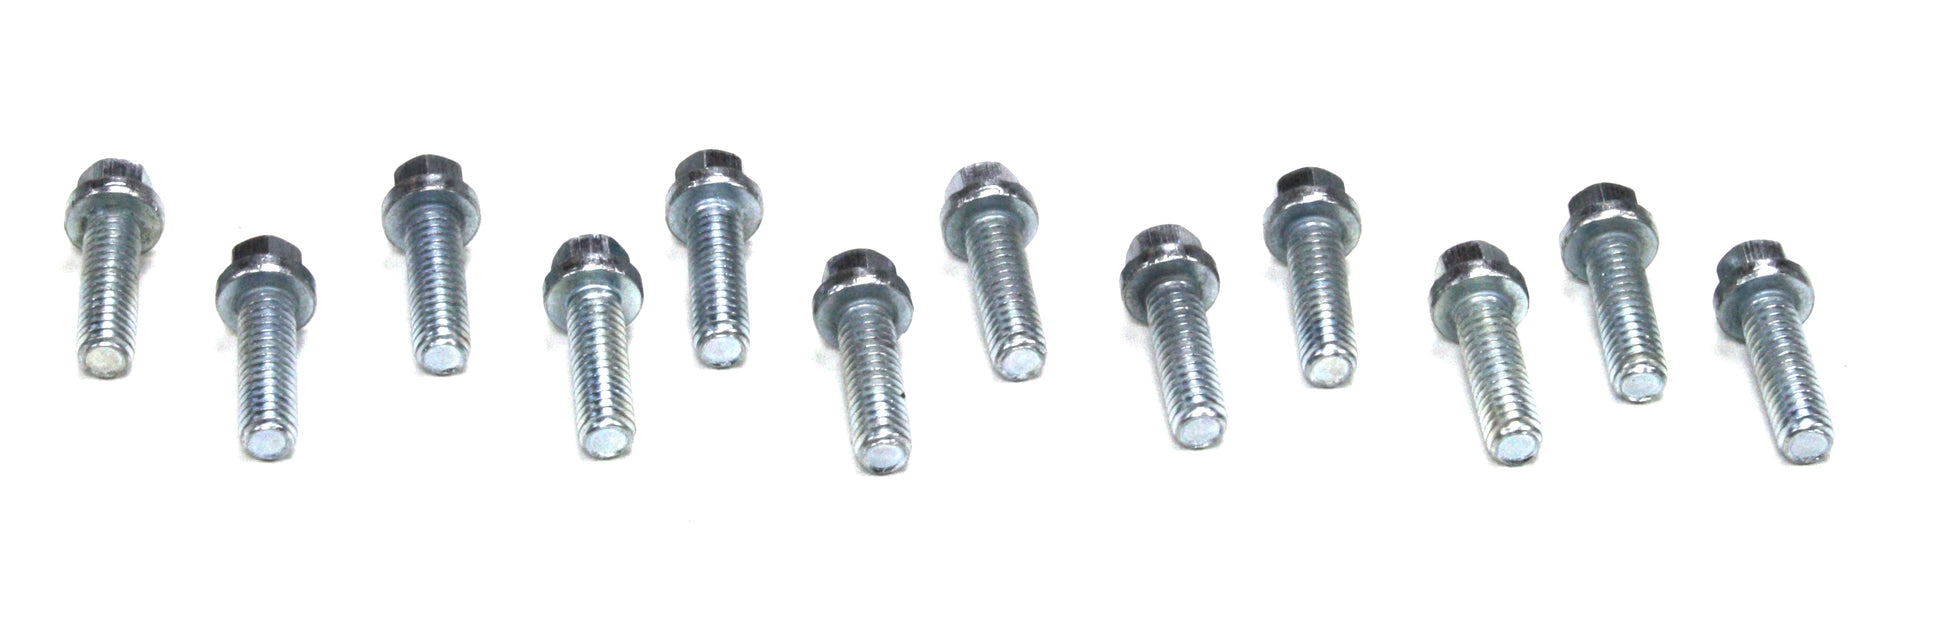 Patriot Exhaust H7977 5/16-18 x1 Zinc plated header bolts (pack of 12)